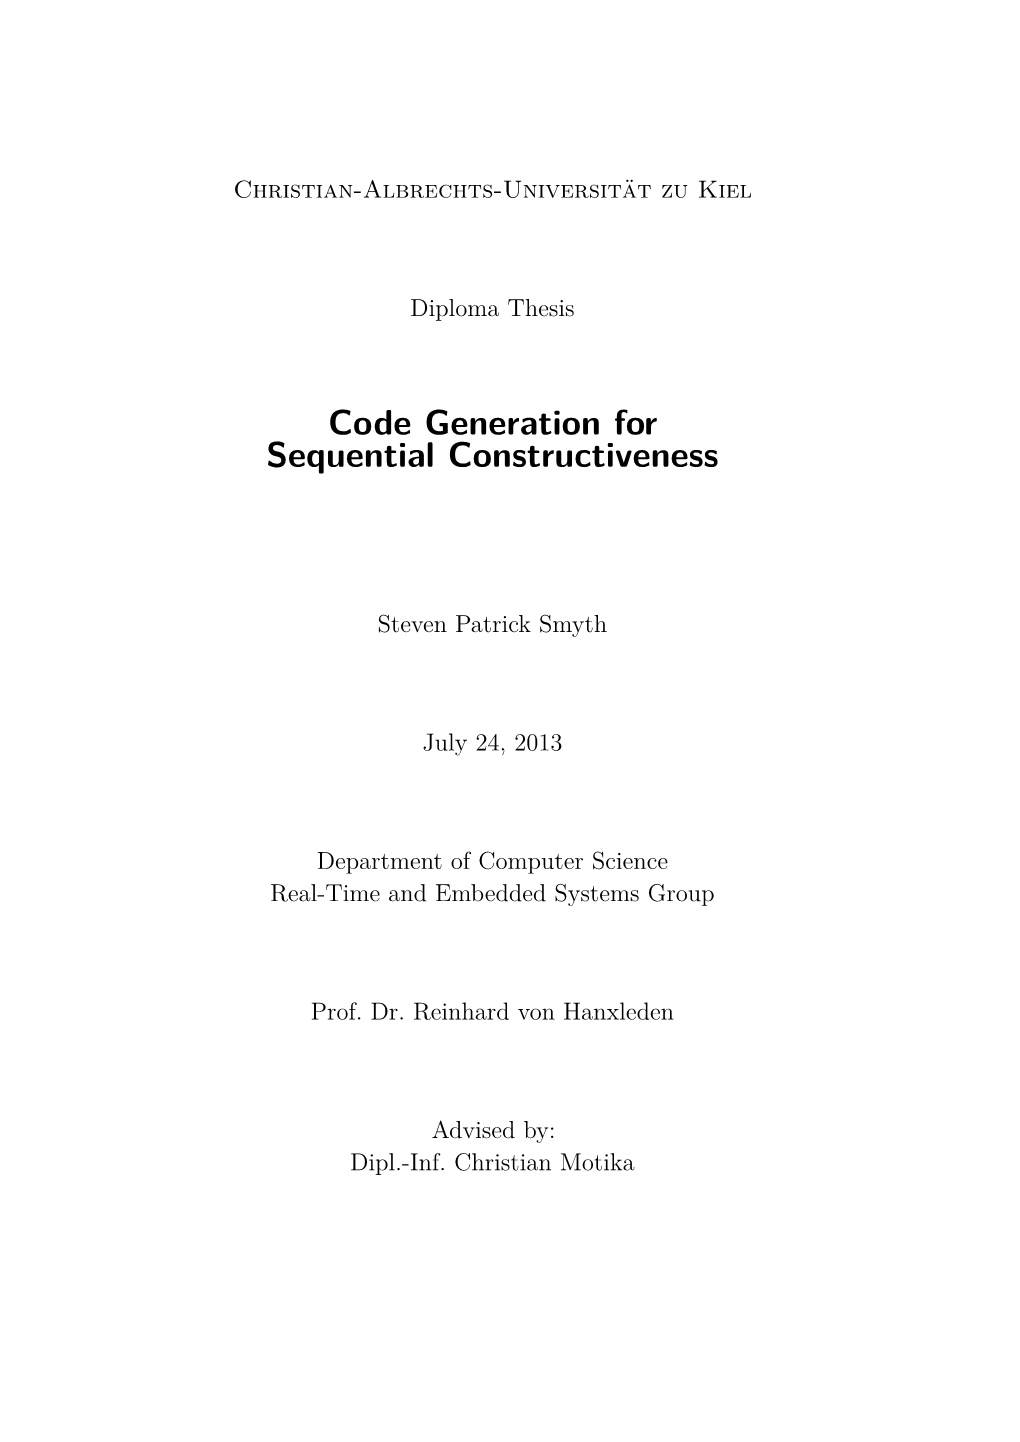 Code Generation for Sequential Constructiveness